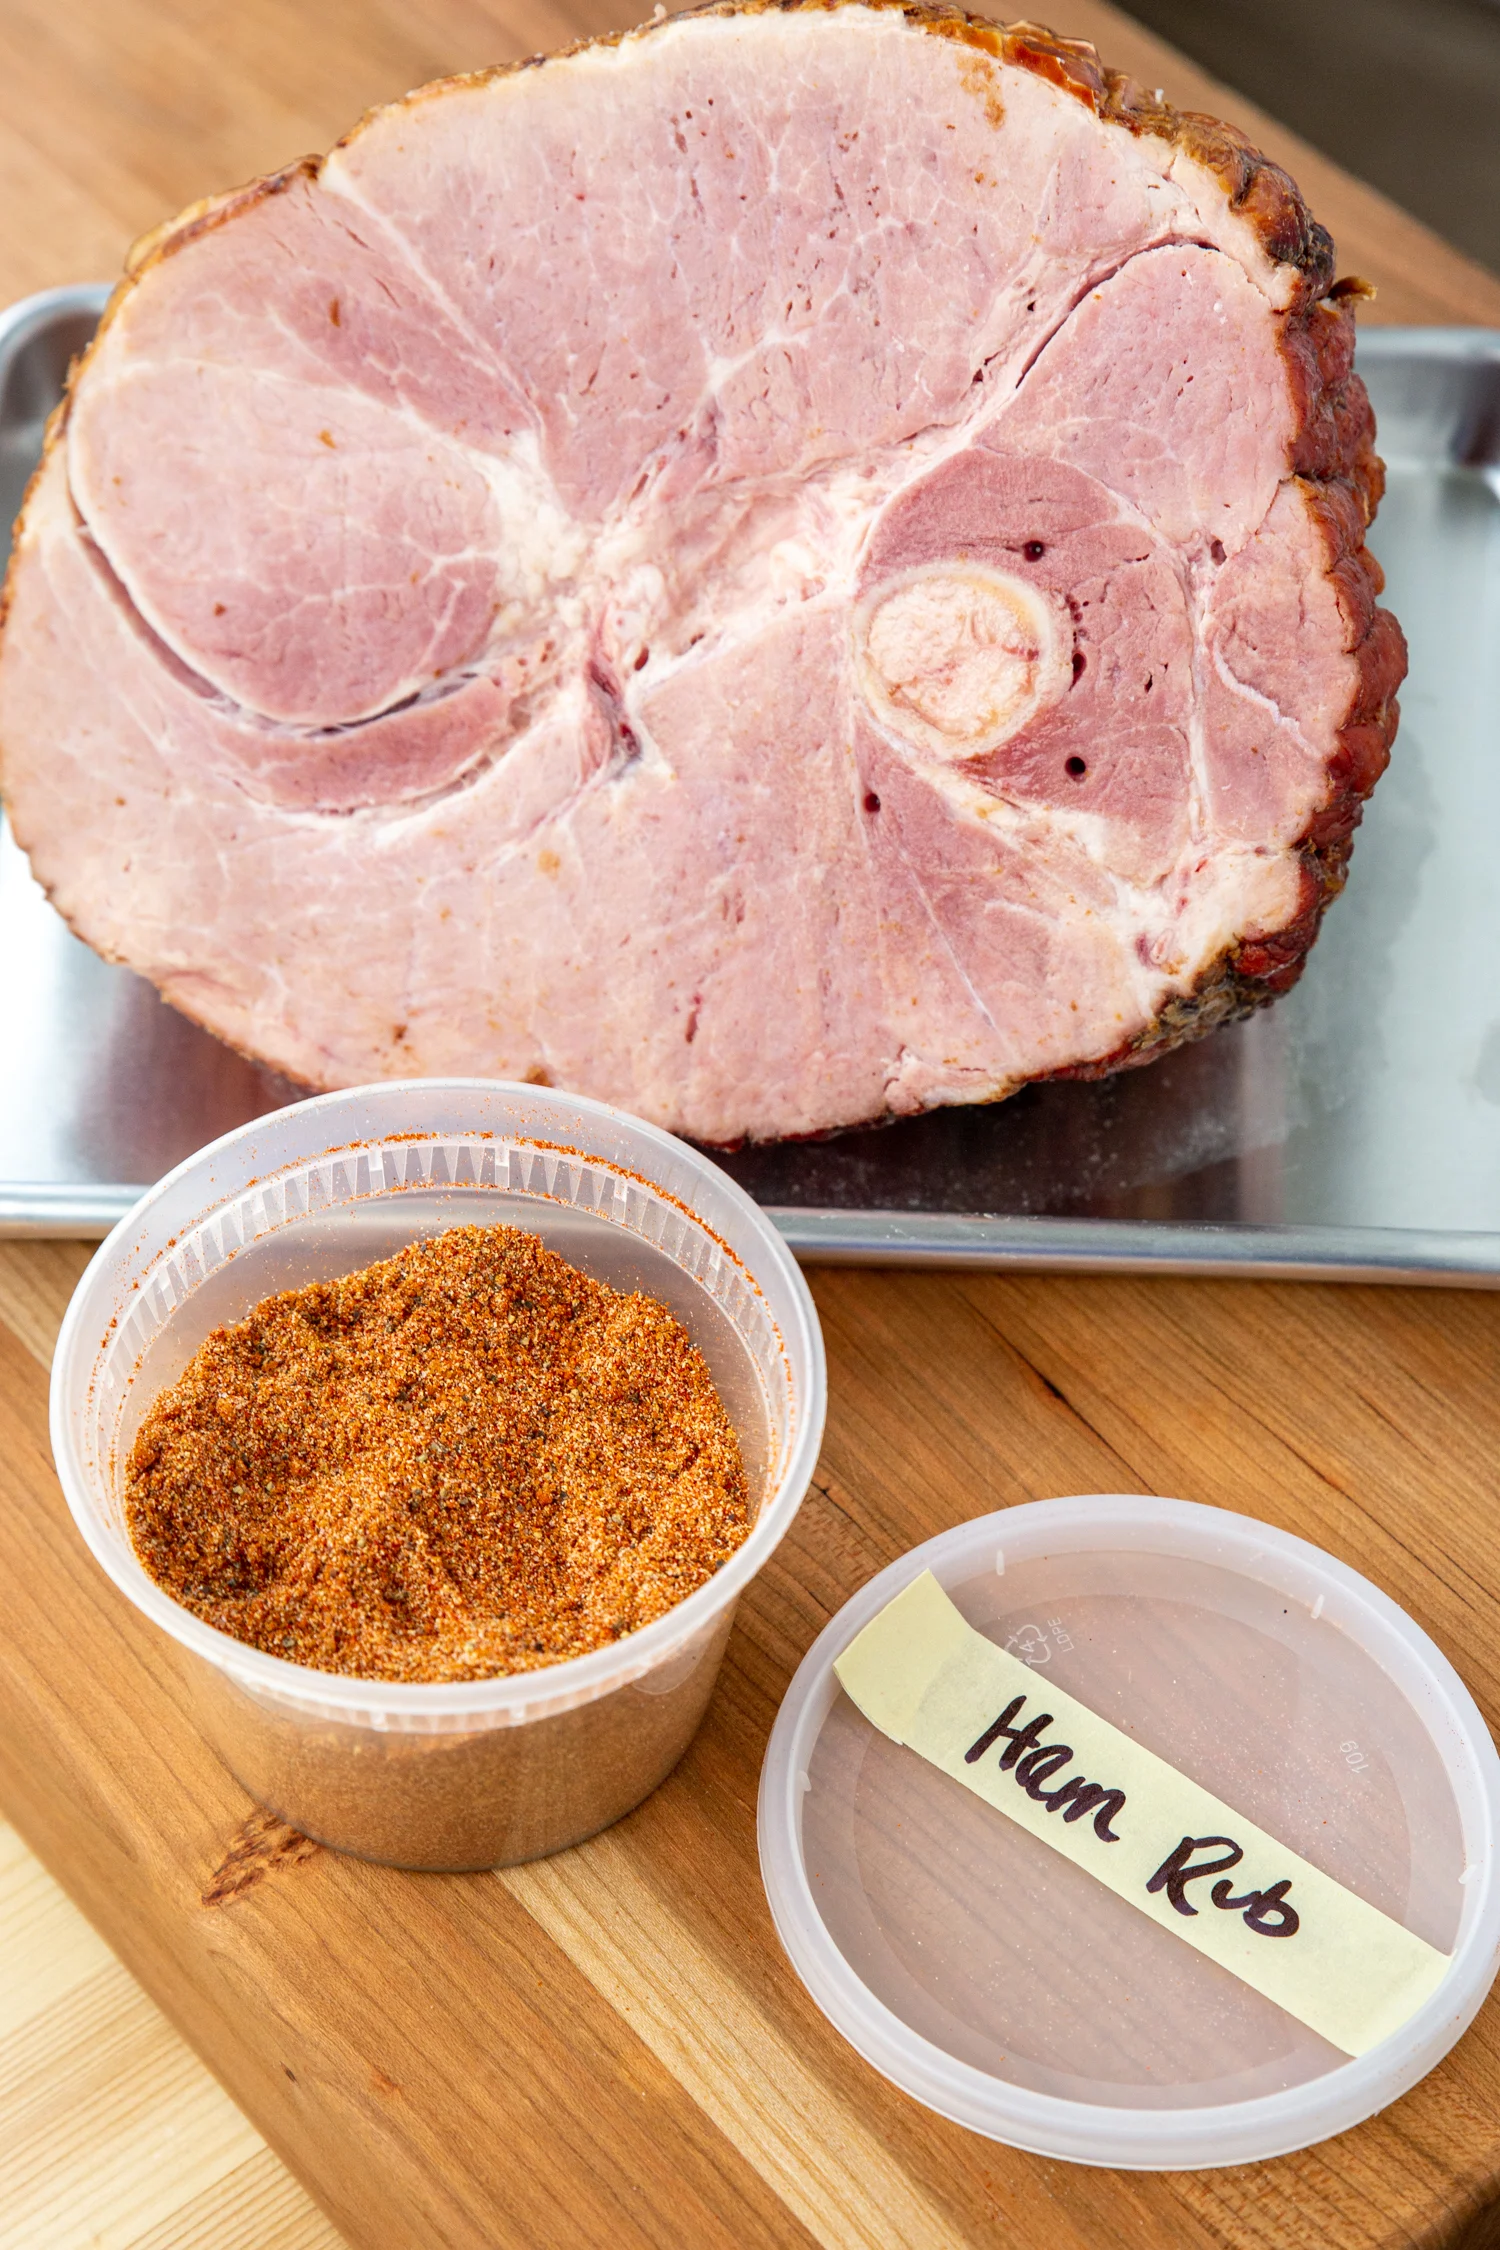 The smoked ham rub in a container next to a raw ham.